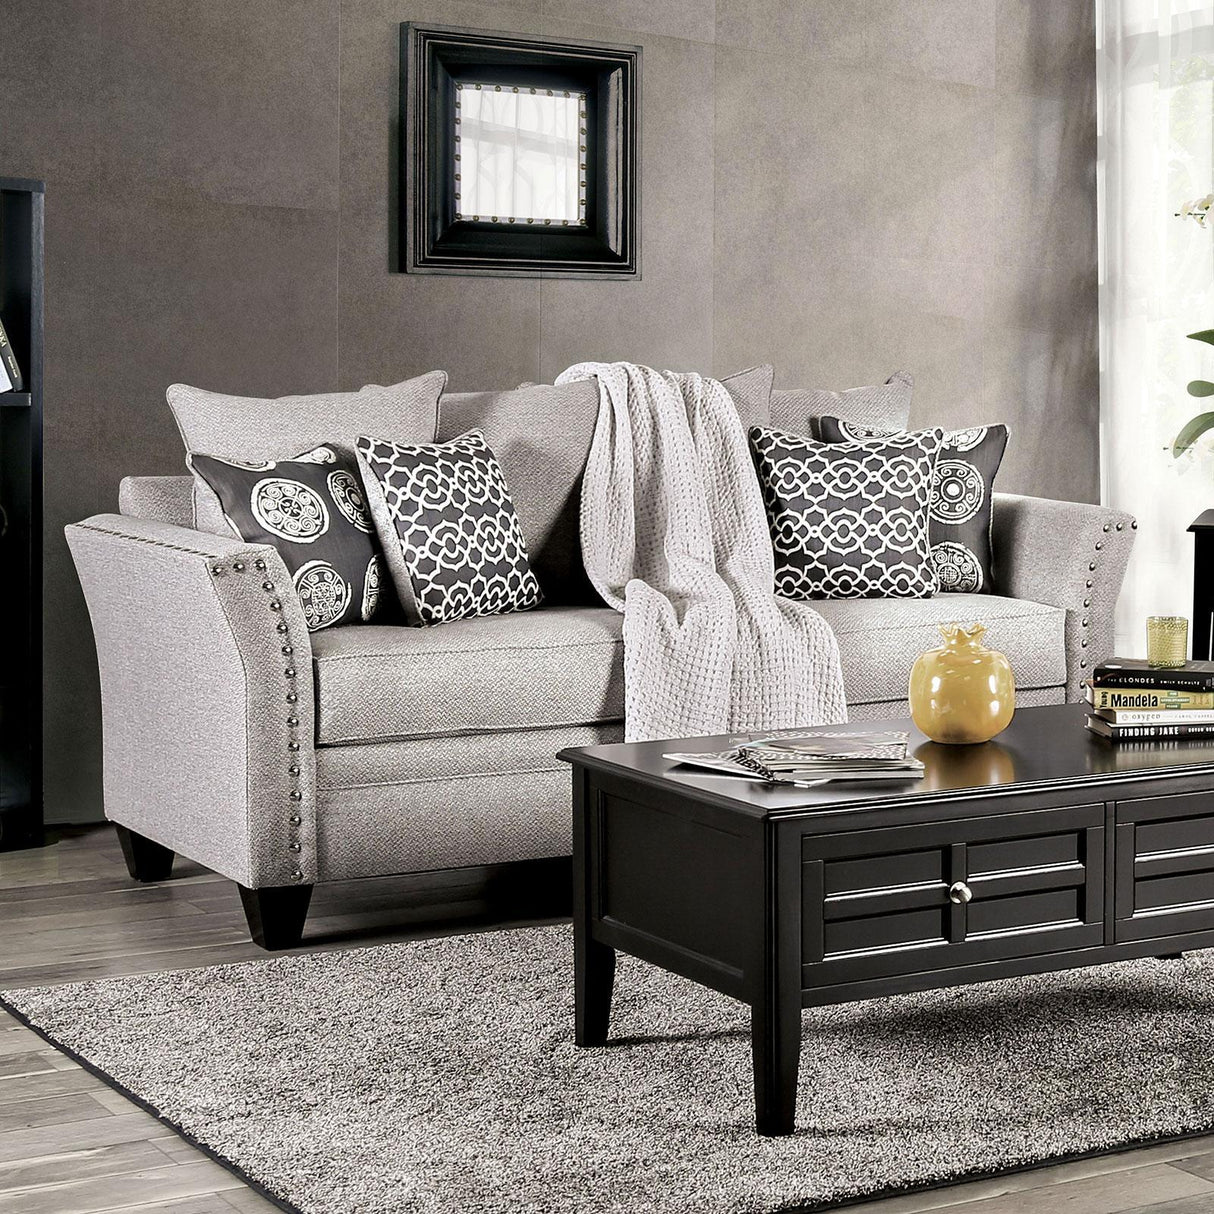 Talgarth Traditional Sofa and Loveseat by Furniture of America Furniture of America